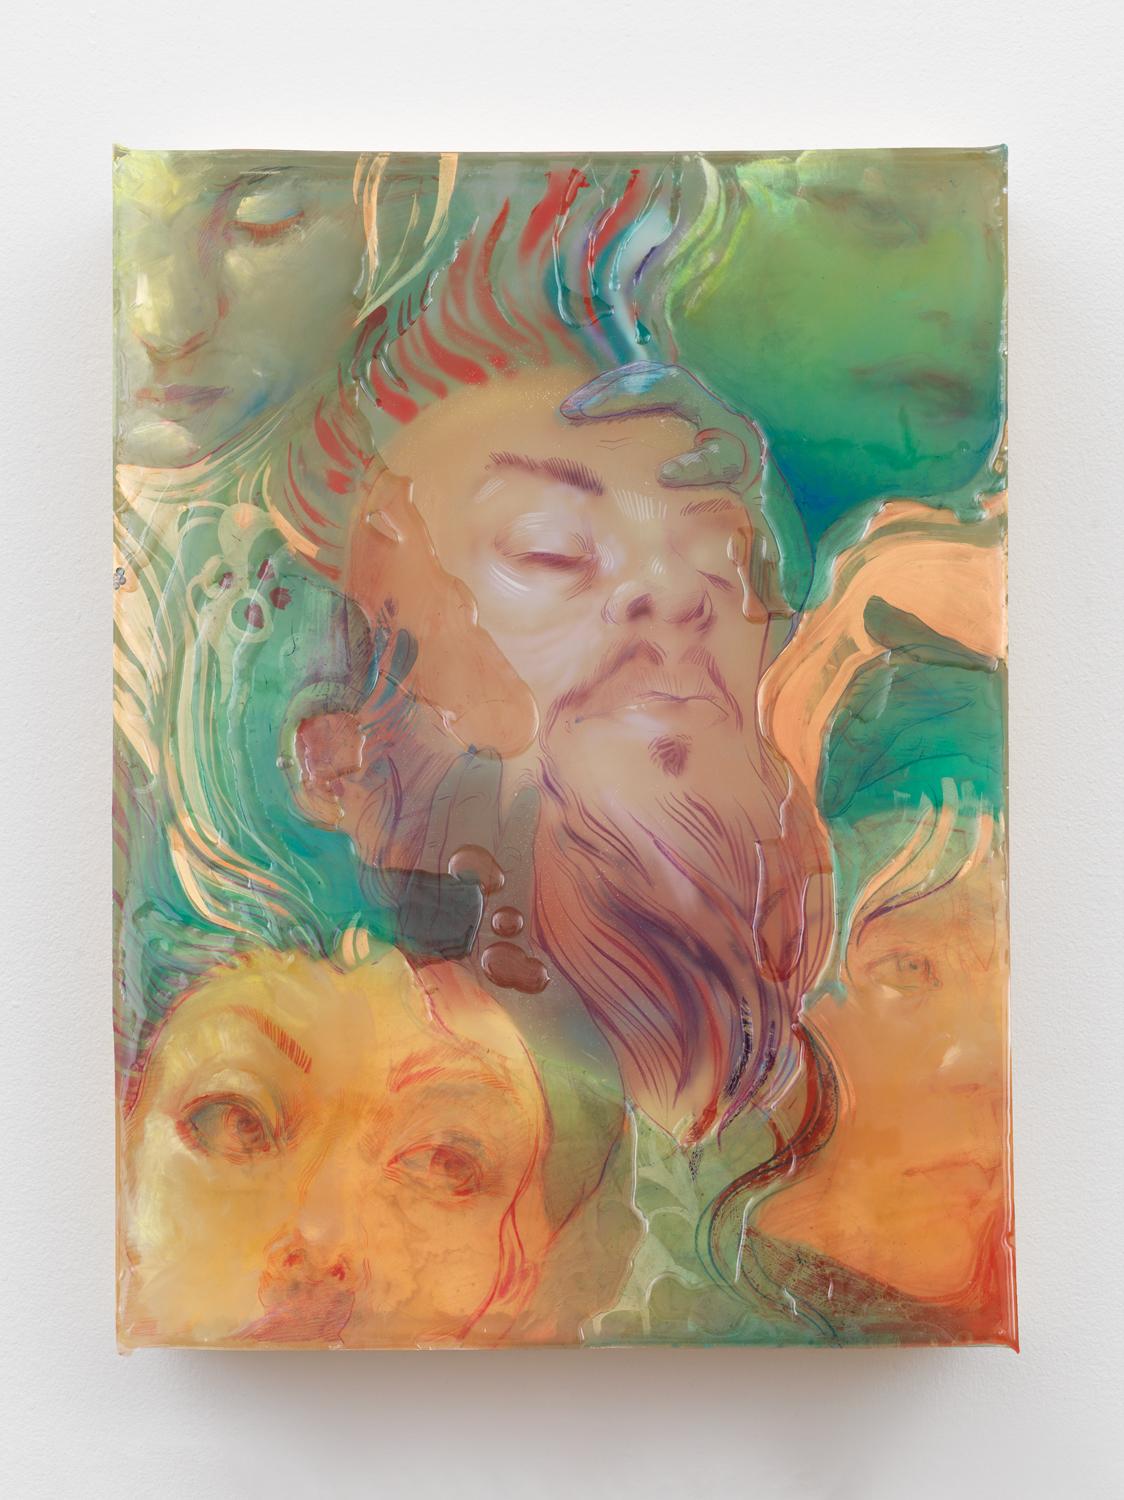 American Dream, Mixed media layered resin painting